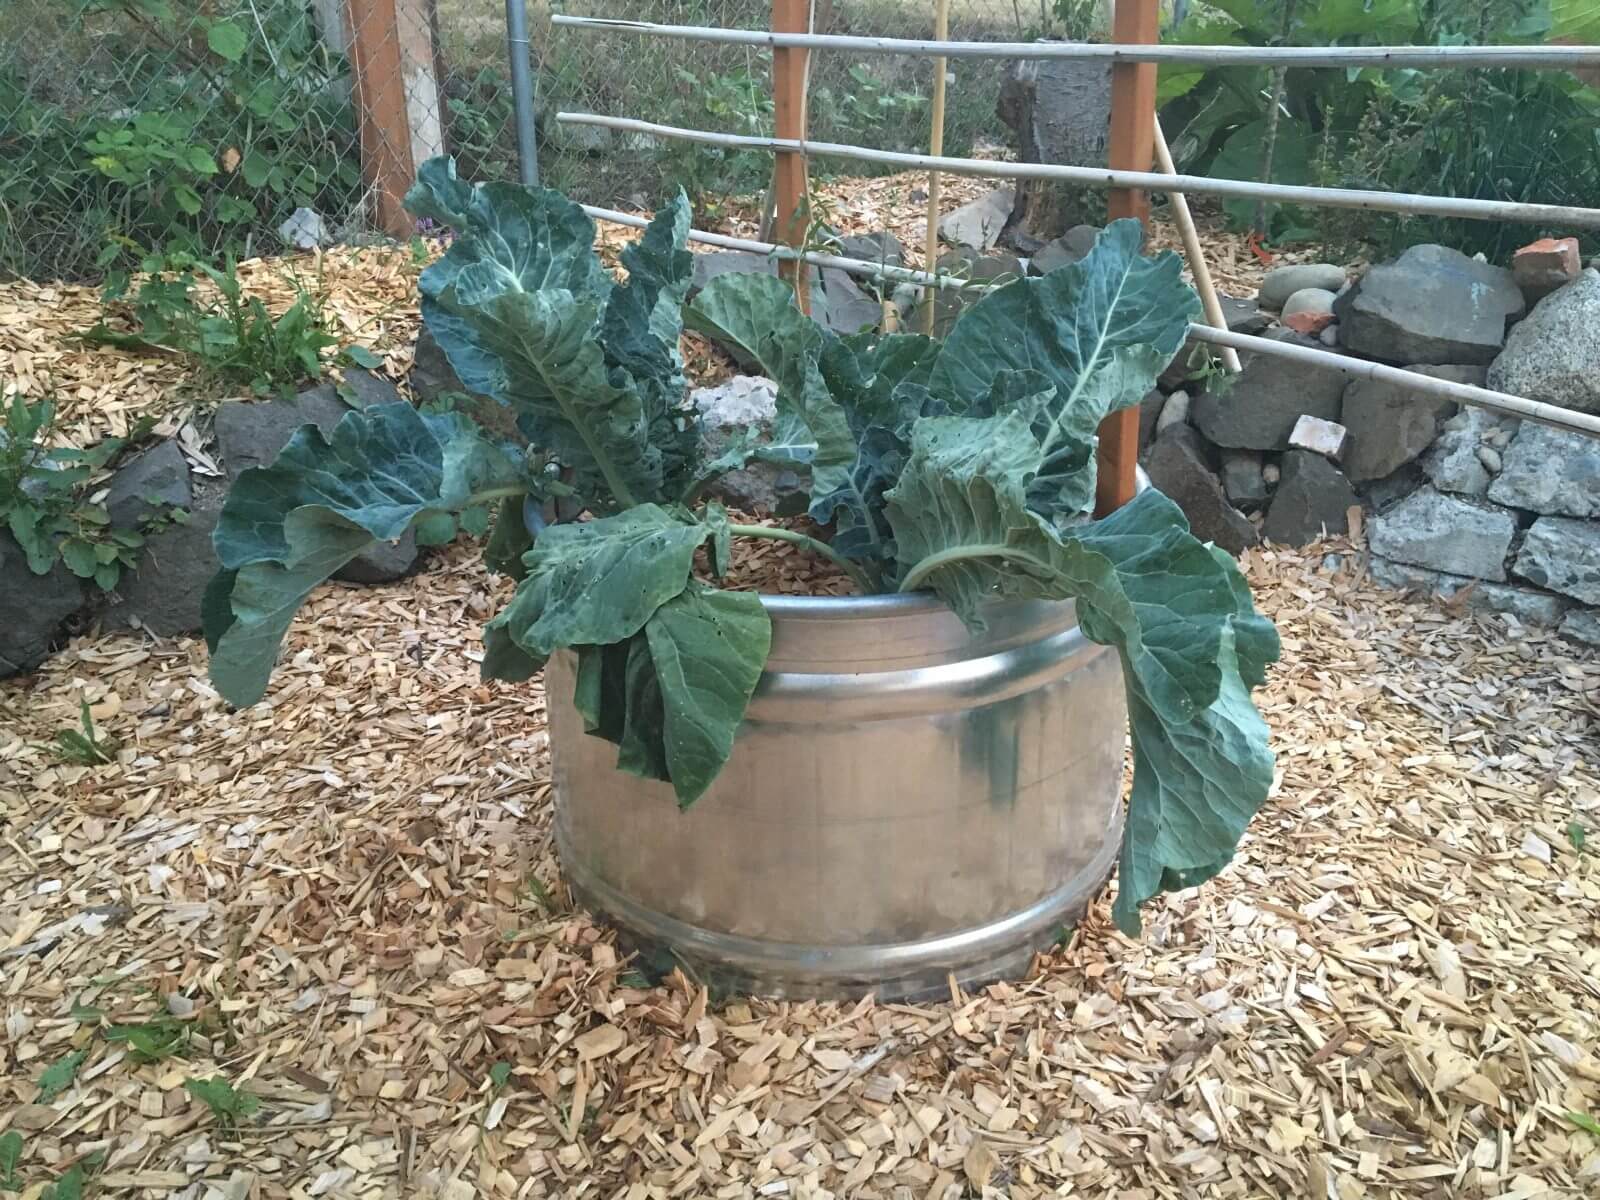 Circular planter in my yard planted with 2 cauliflower plants & there